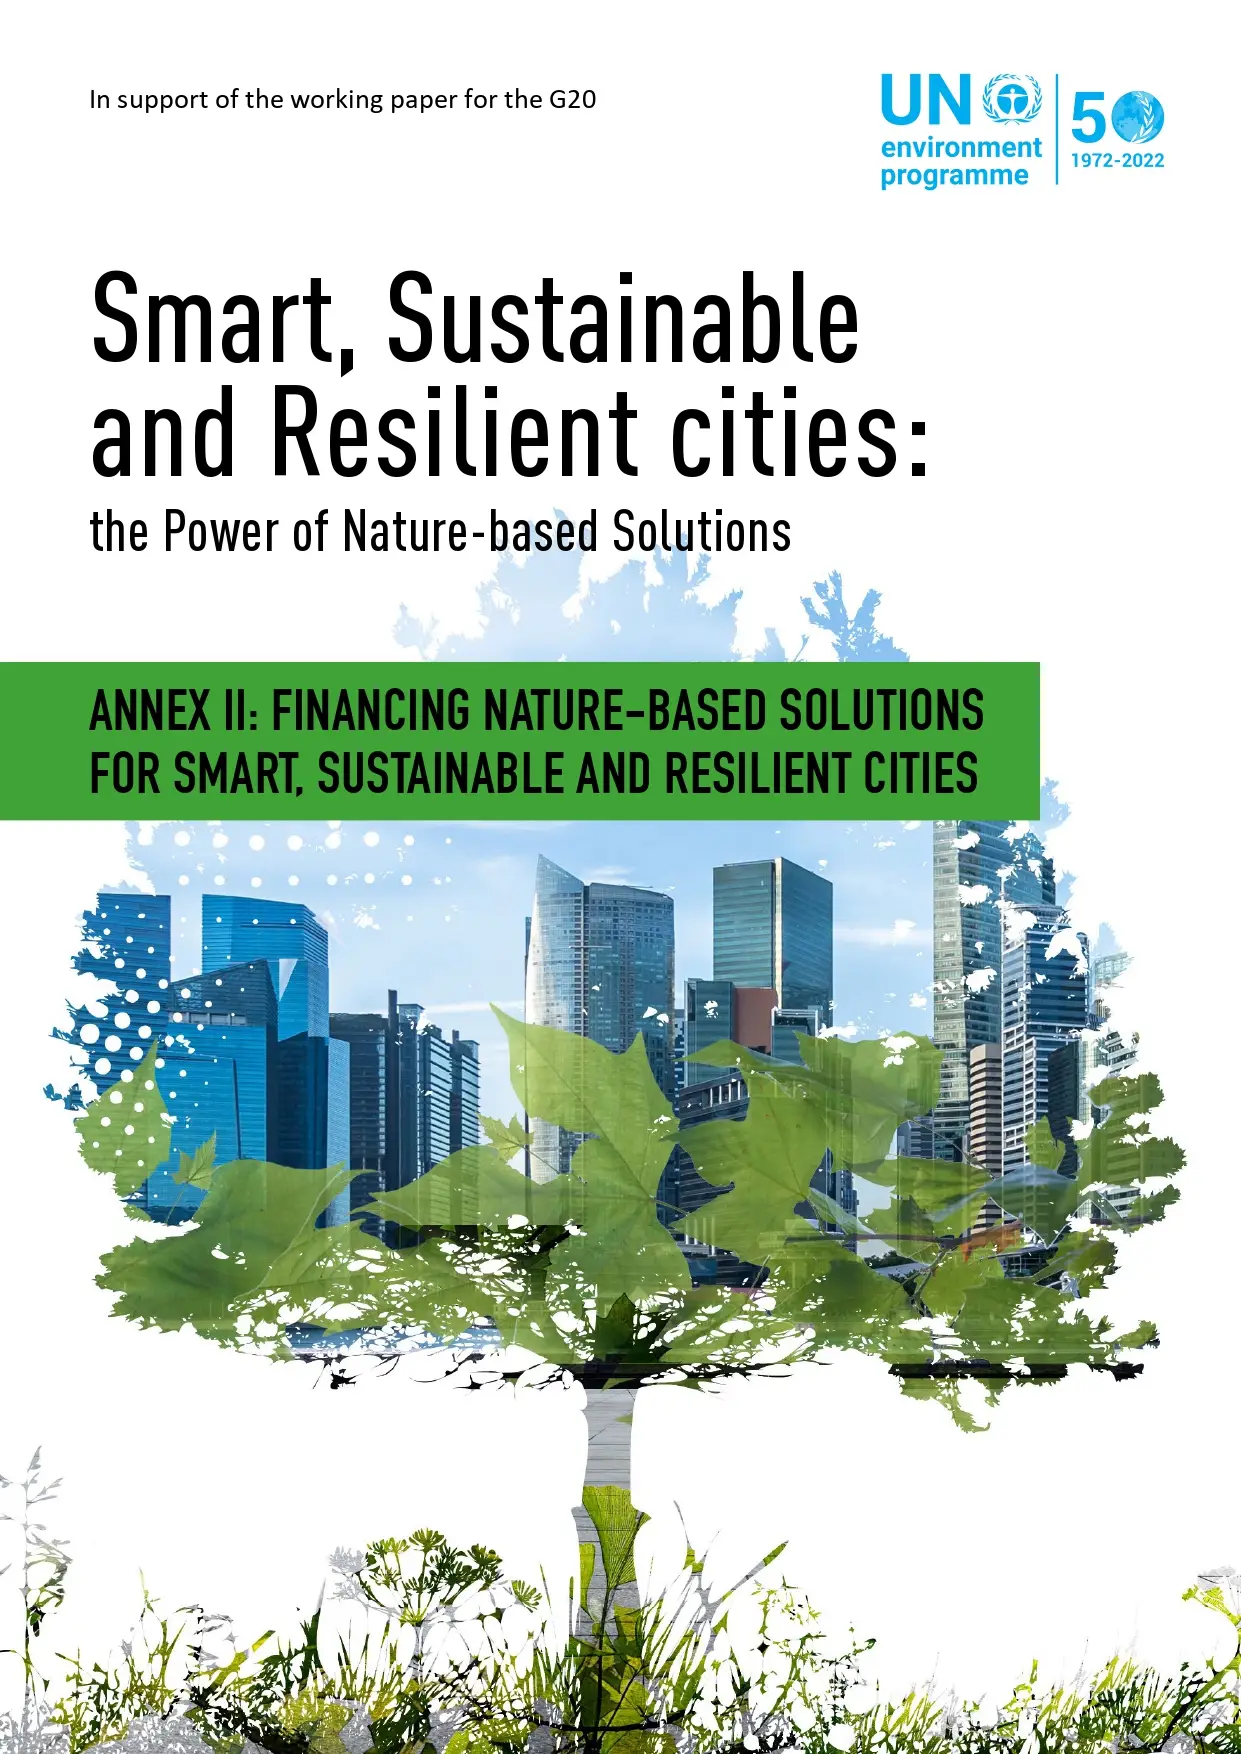 Smart, Sustainable and Resilient Cities: the Power of Nature-Based Solutions